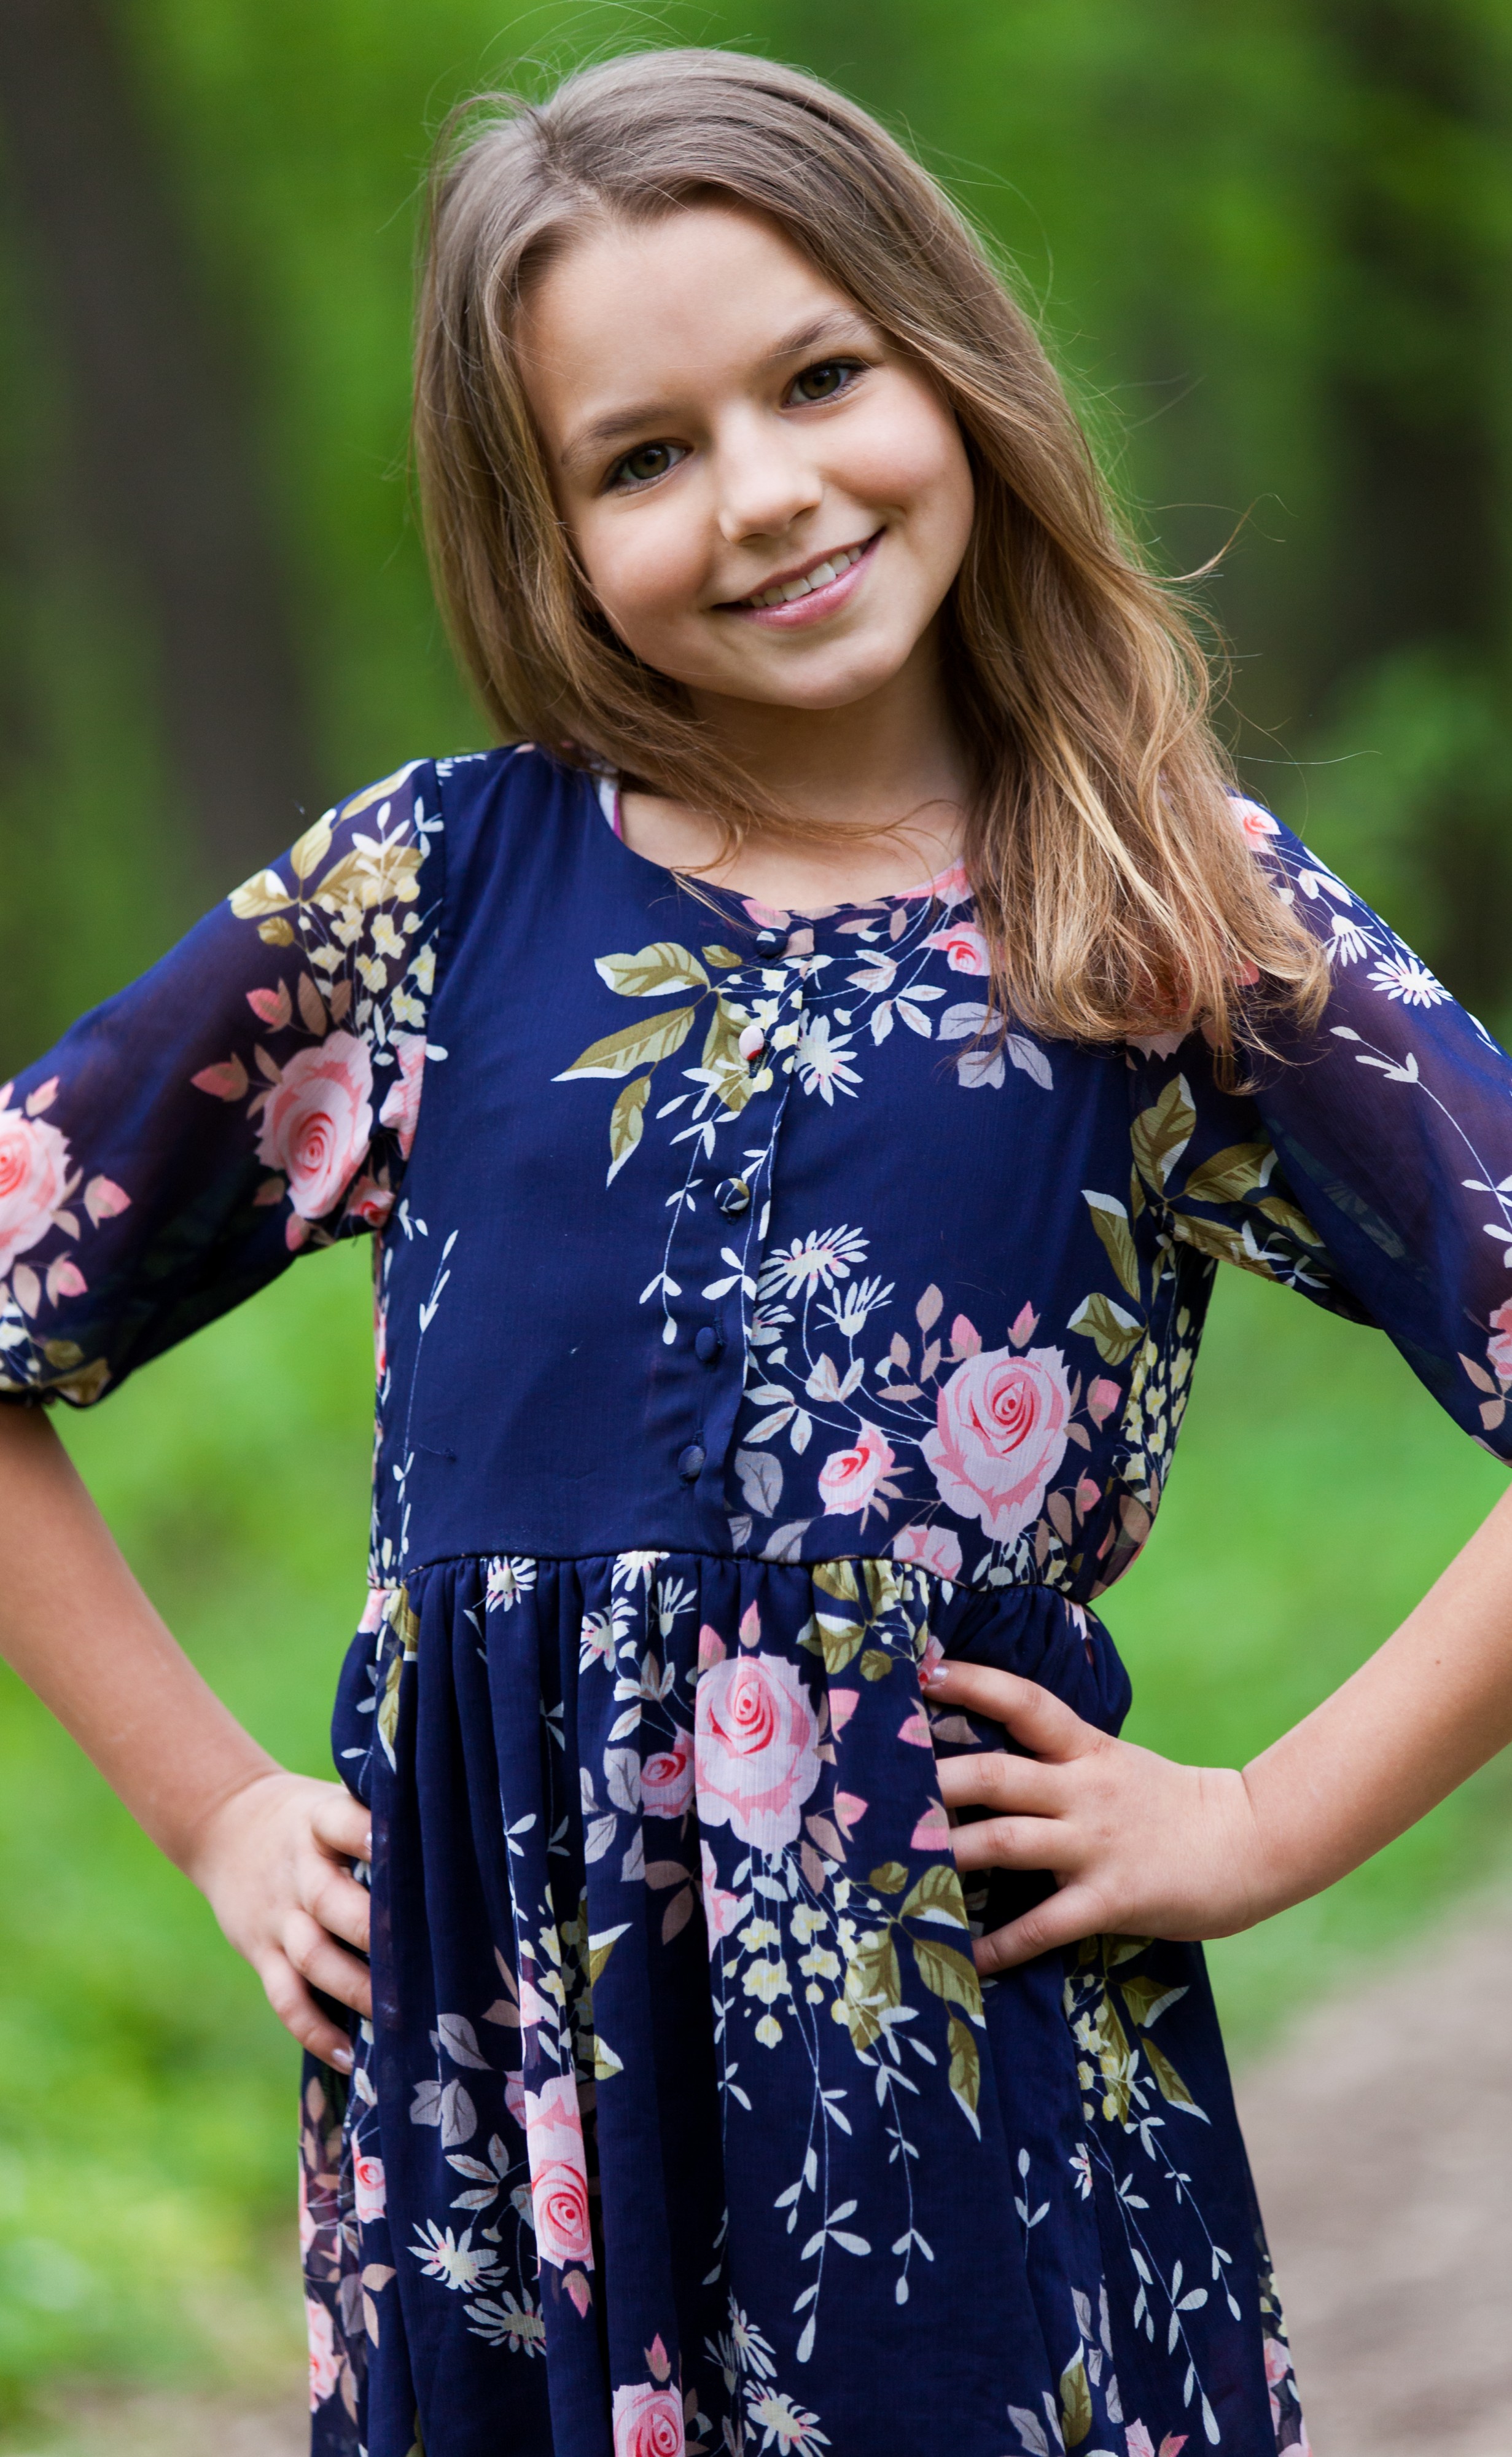 a cute 12-year-old girl photographed in May 2015, picture 9